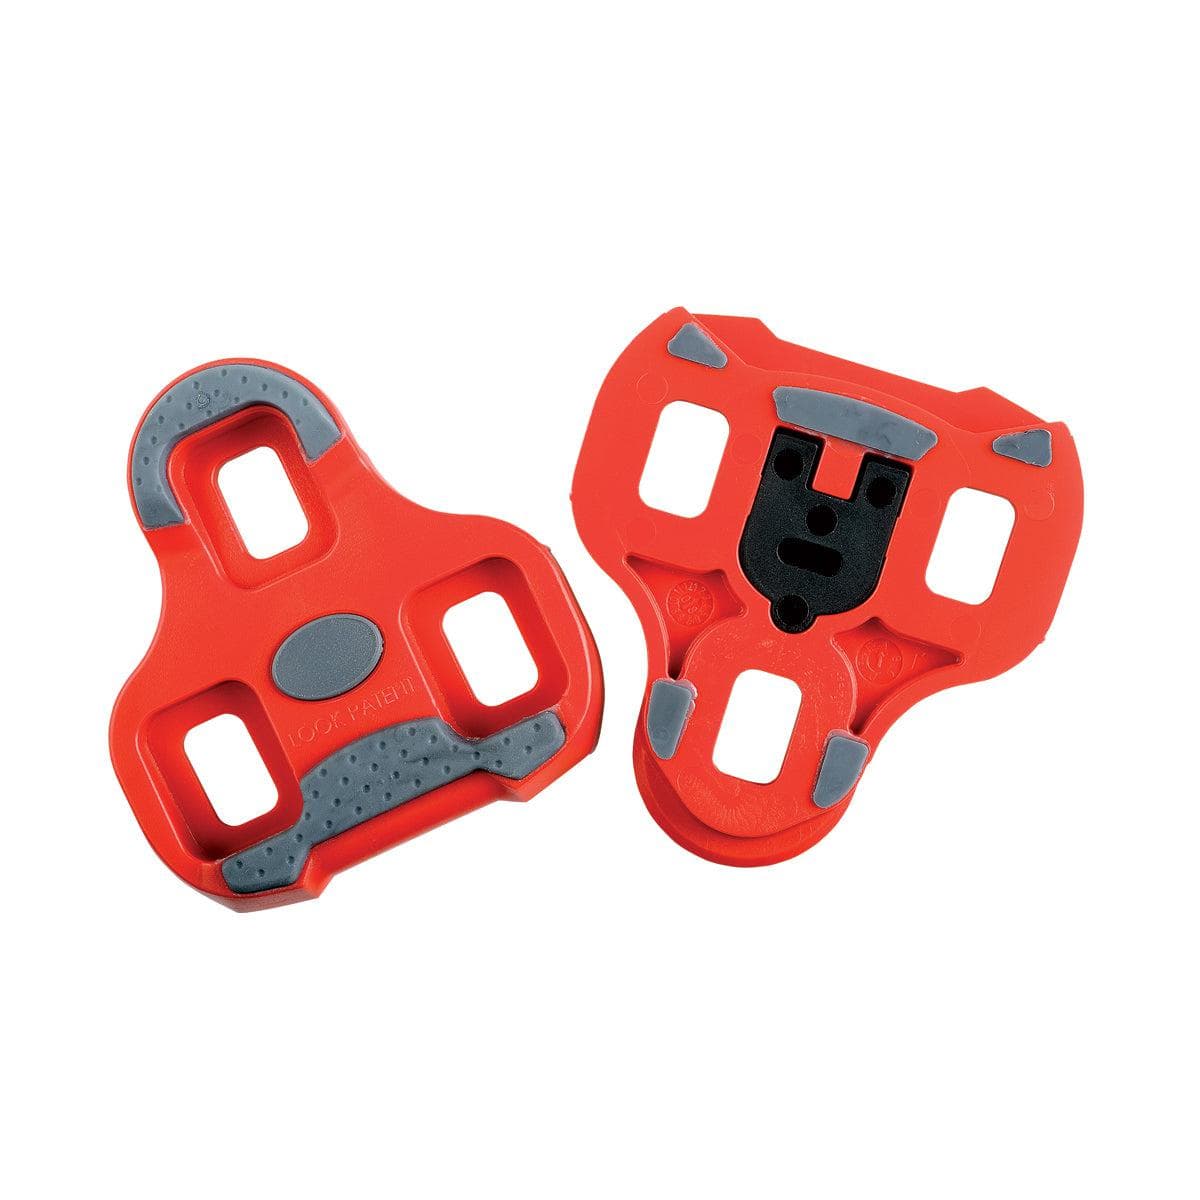 Look Keo Cleat With Gripper 9 Degree Float: Red (pair)